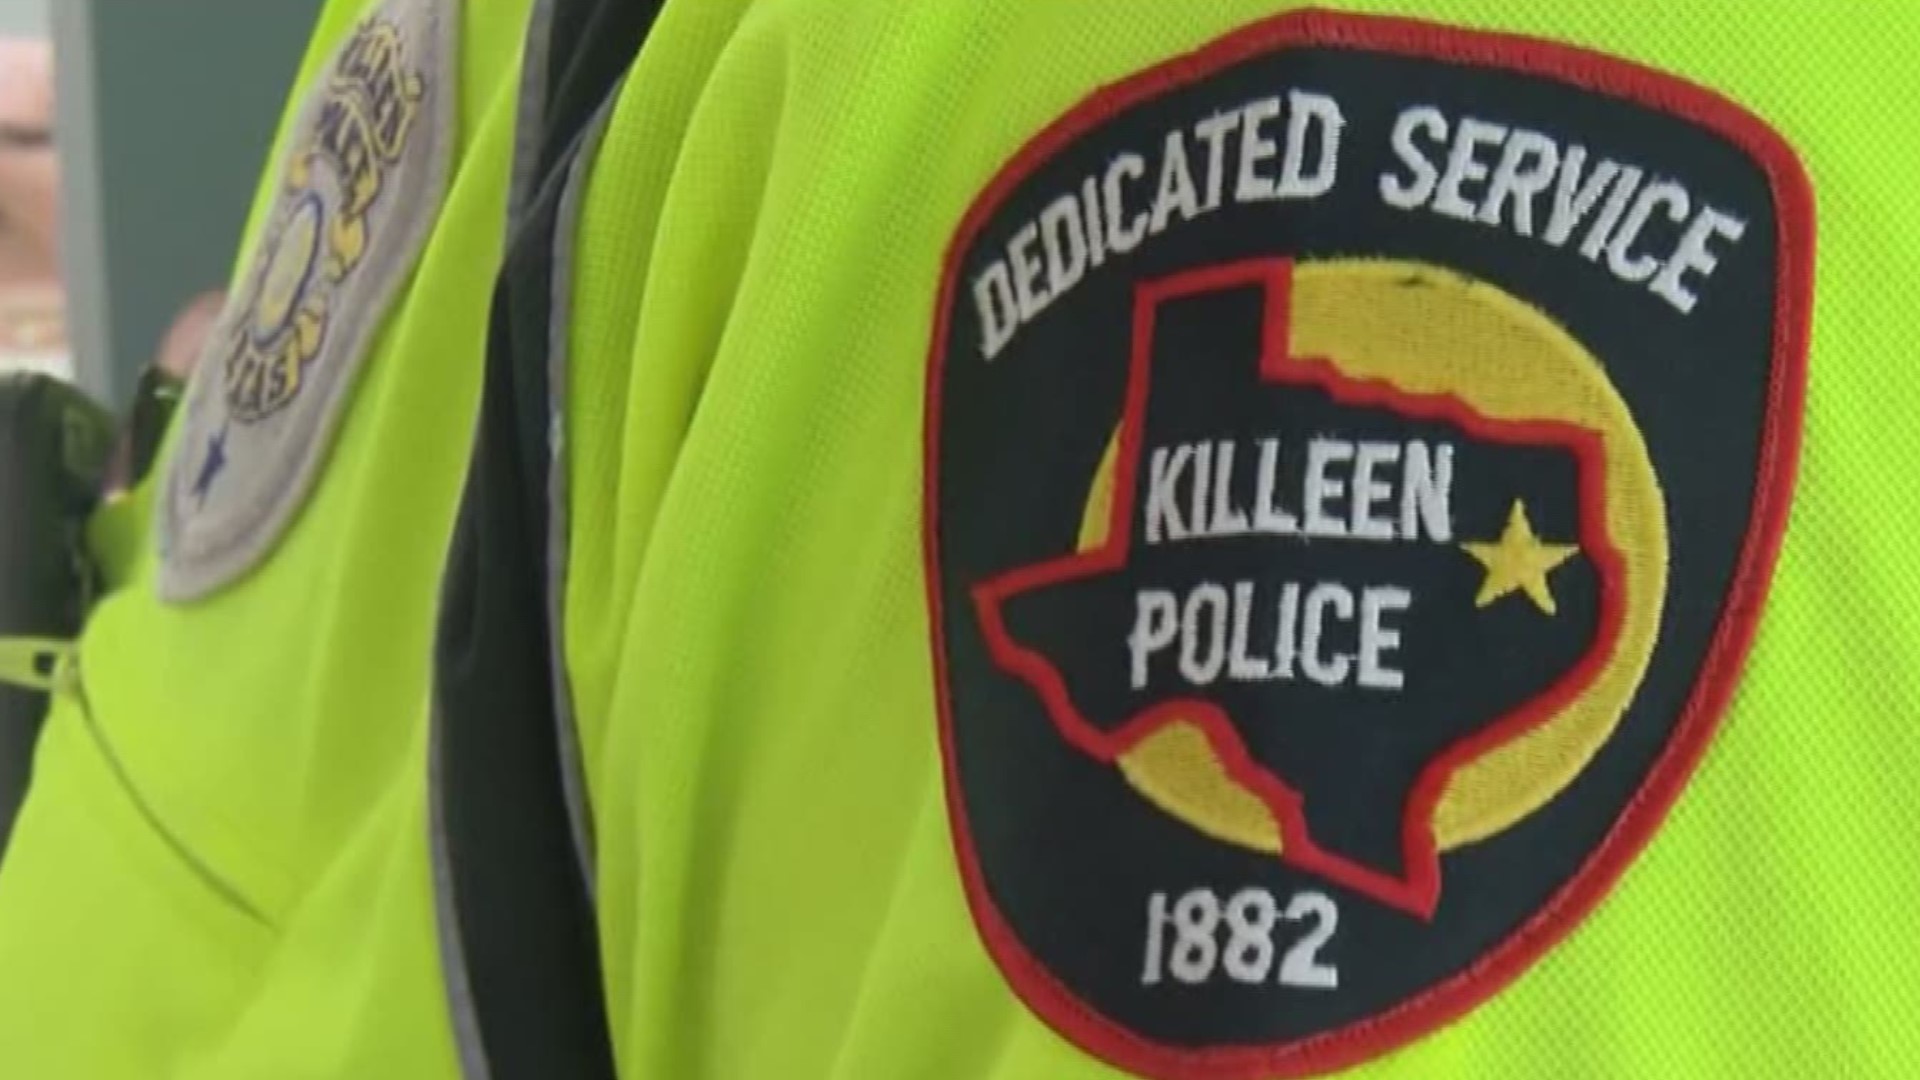 In Tuesday's meeting, Charles Kimble, Killeen's Chief of Police said his department already stopped no-knock warrants regarding drug-related cases.